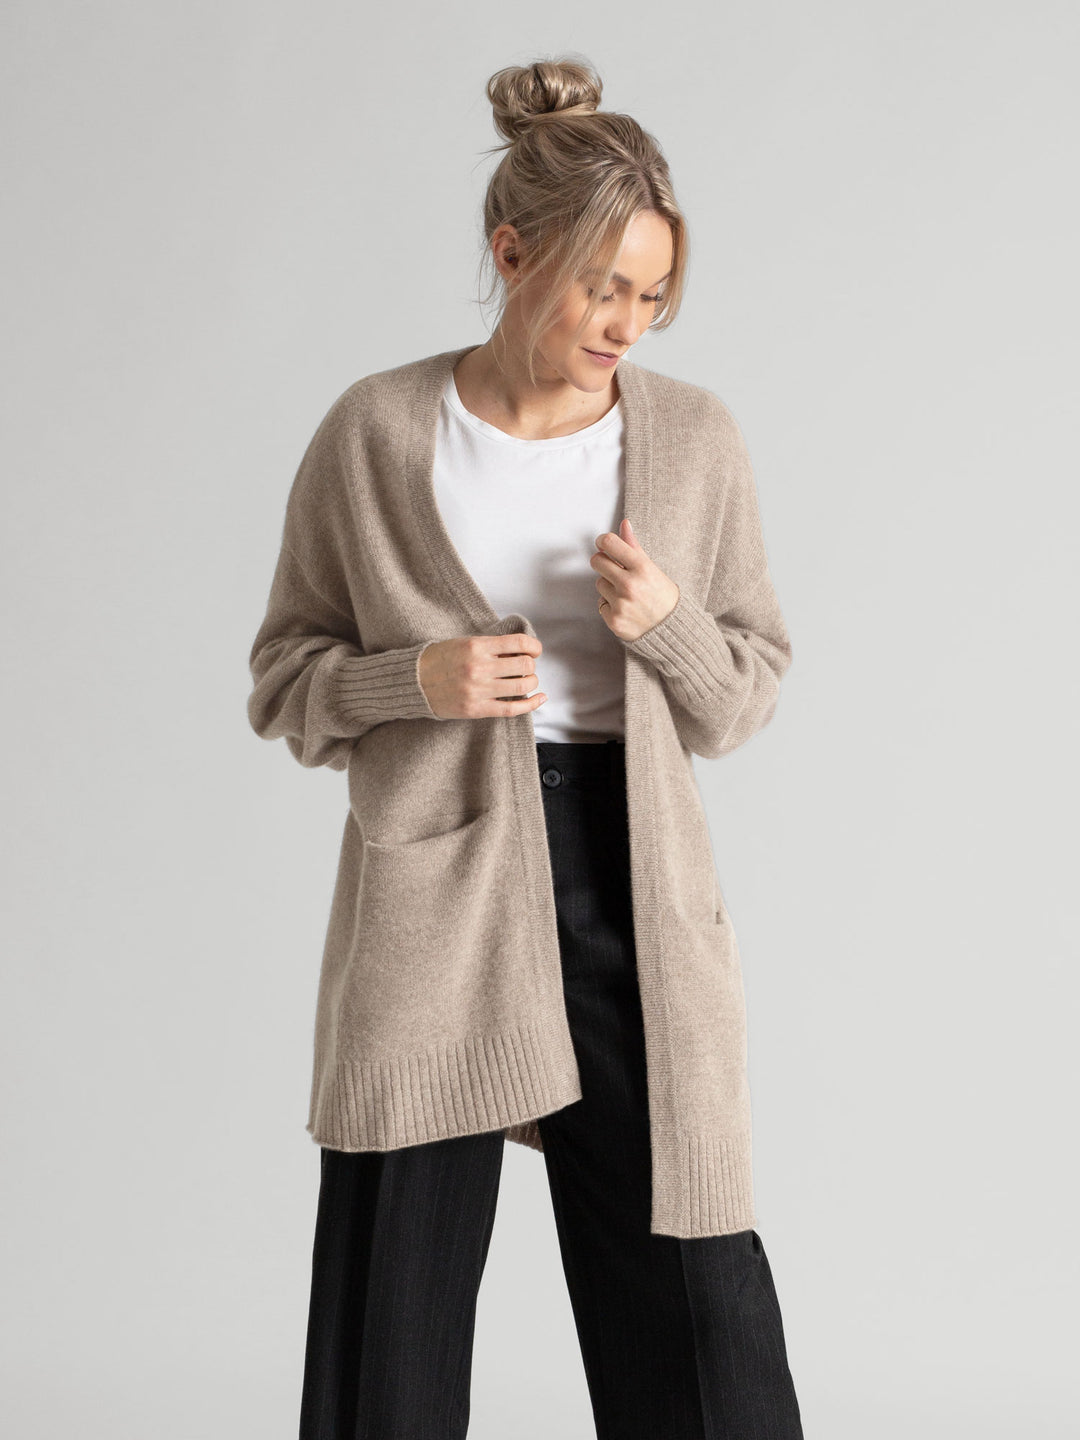 Cashmere cardigan "Lounge" in color; toast, in 100% cashmere. Scandinavian design by Kashmina